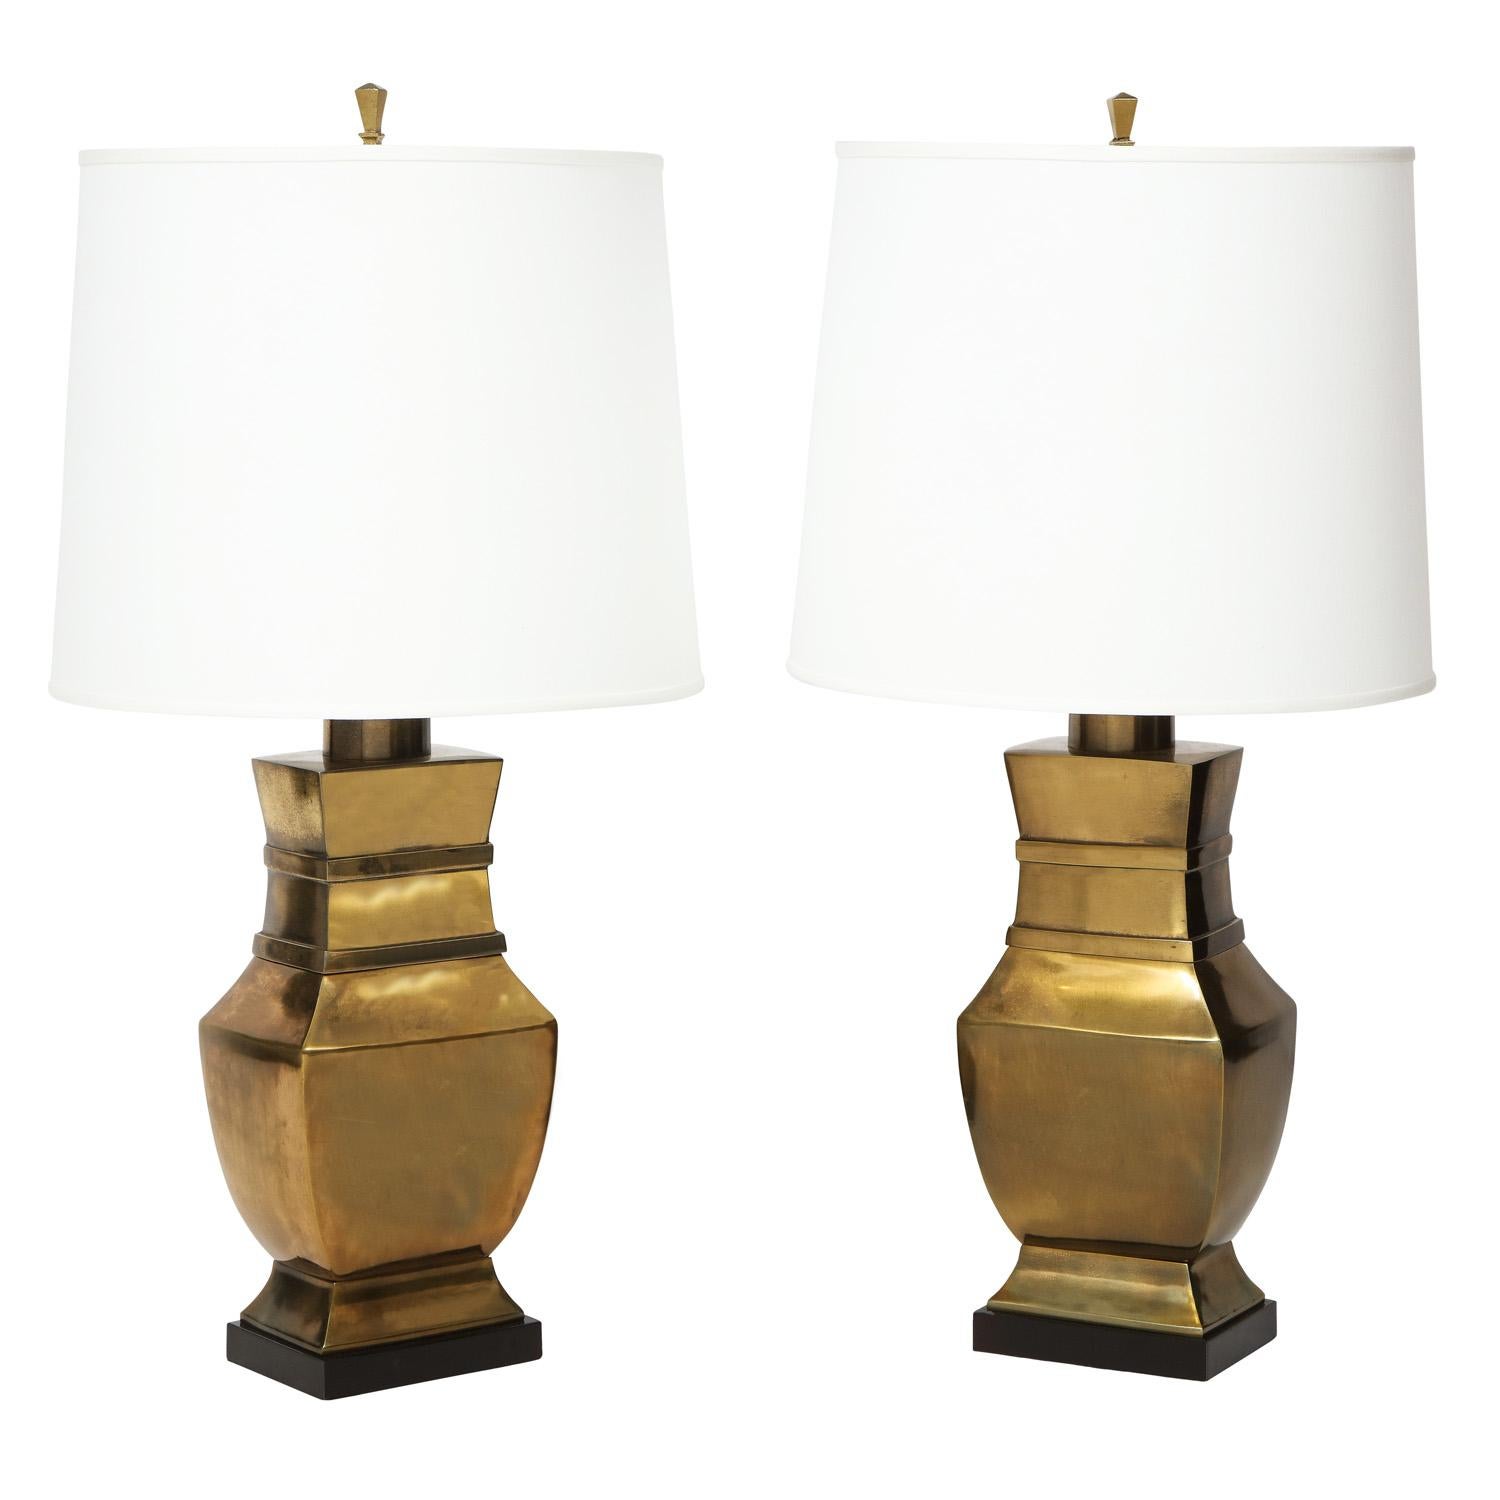 Pair of Asian inspired neoclassical table lamps in bronze with ebonized bases by Paul Hanson, American 1950's. These lamps are beautifully proportioned and very elegant.

Shade diameter: 16 inches
Shade height: 13 inches.